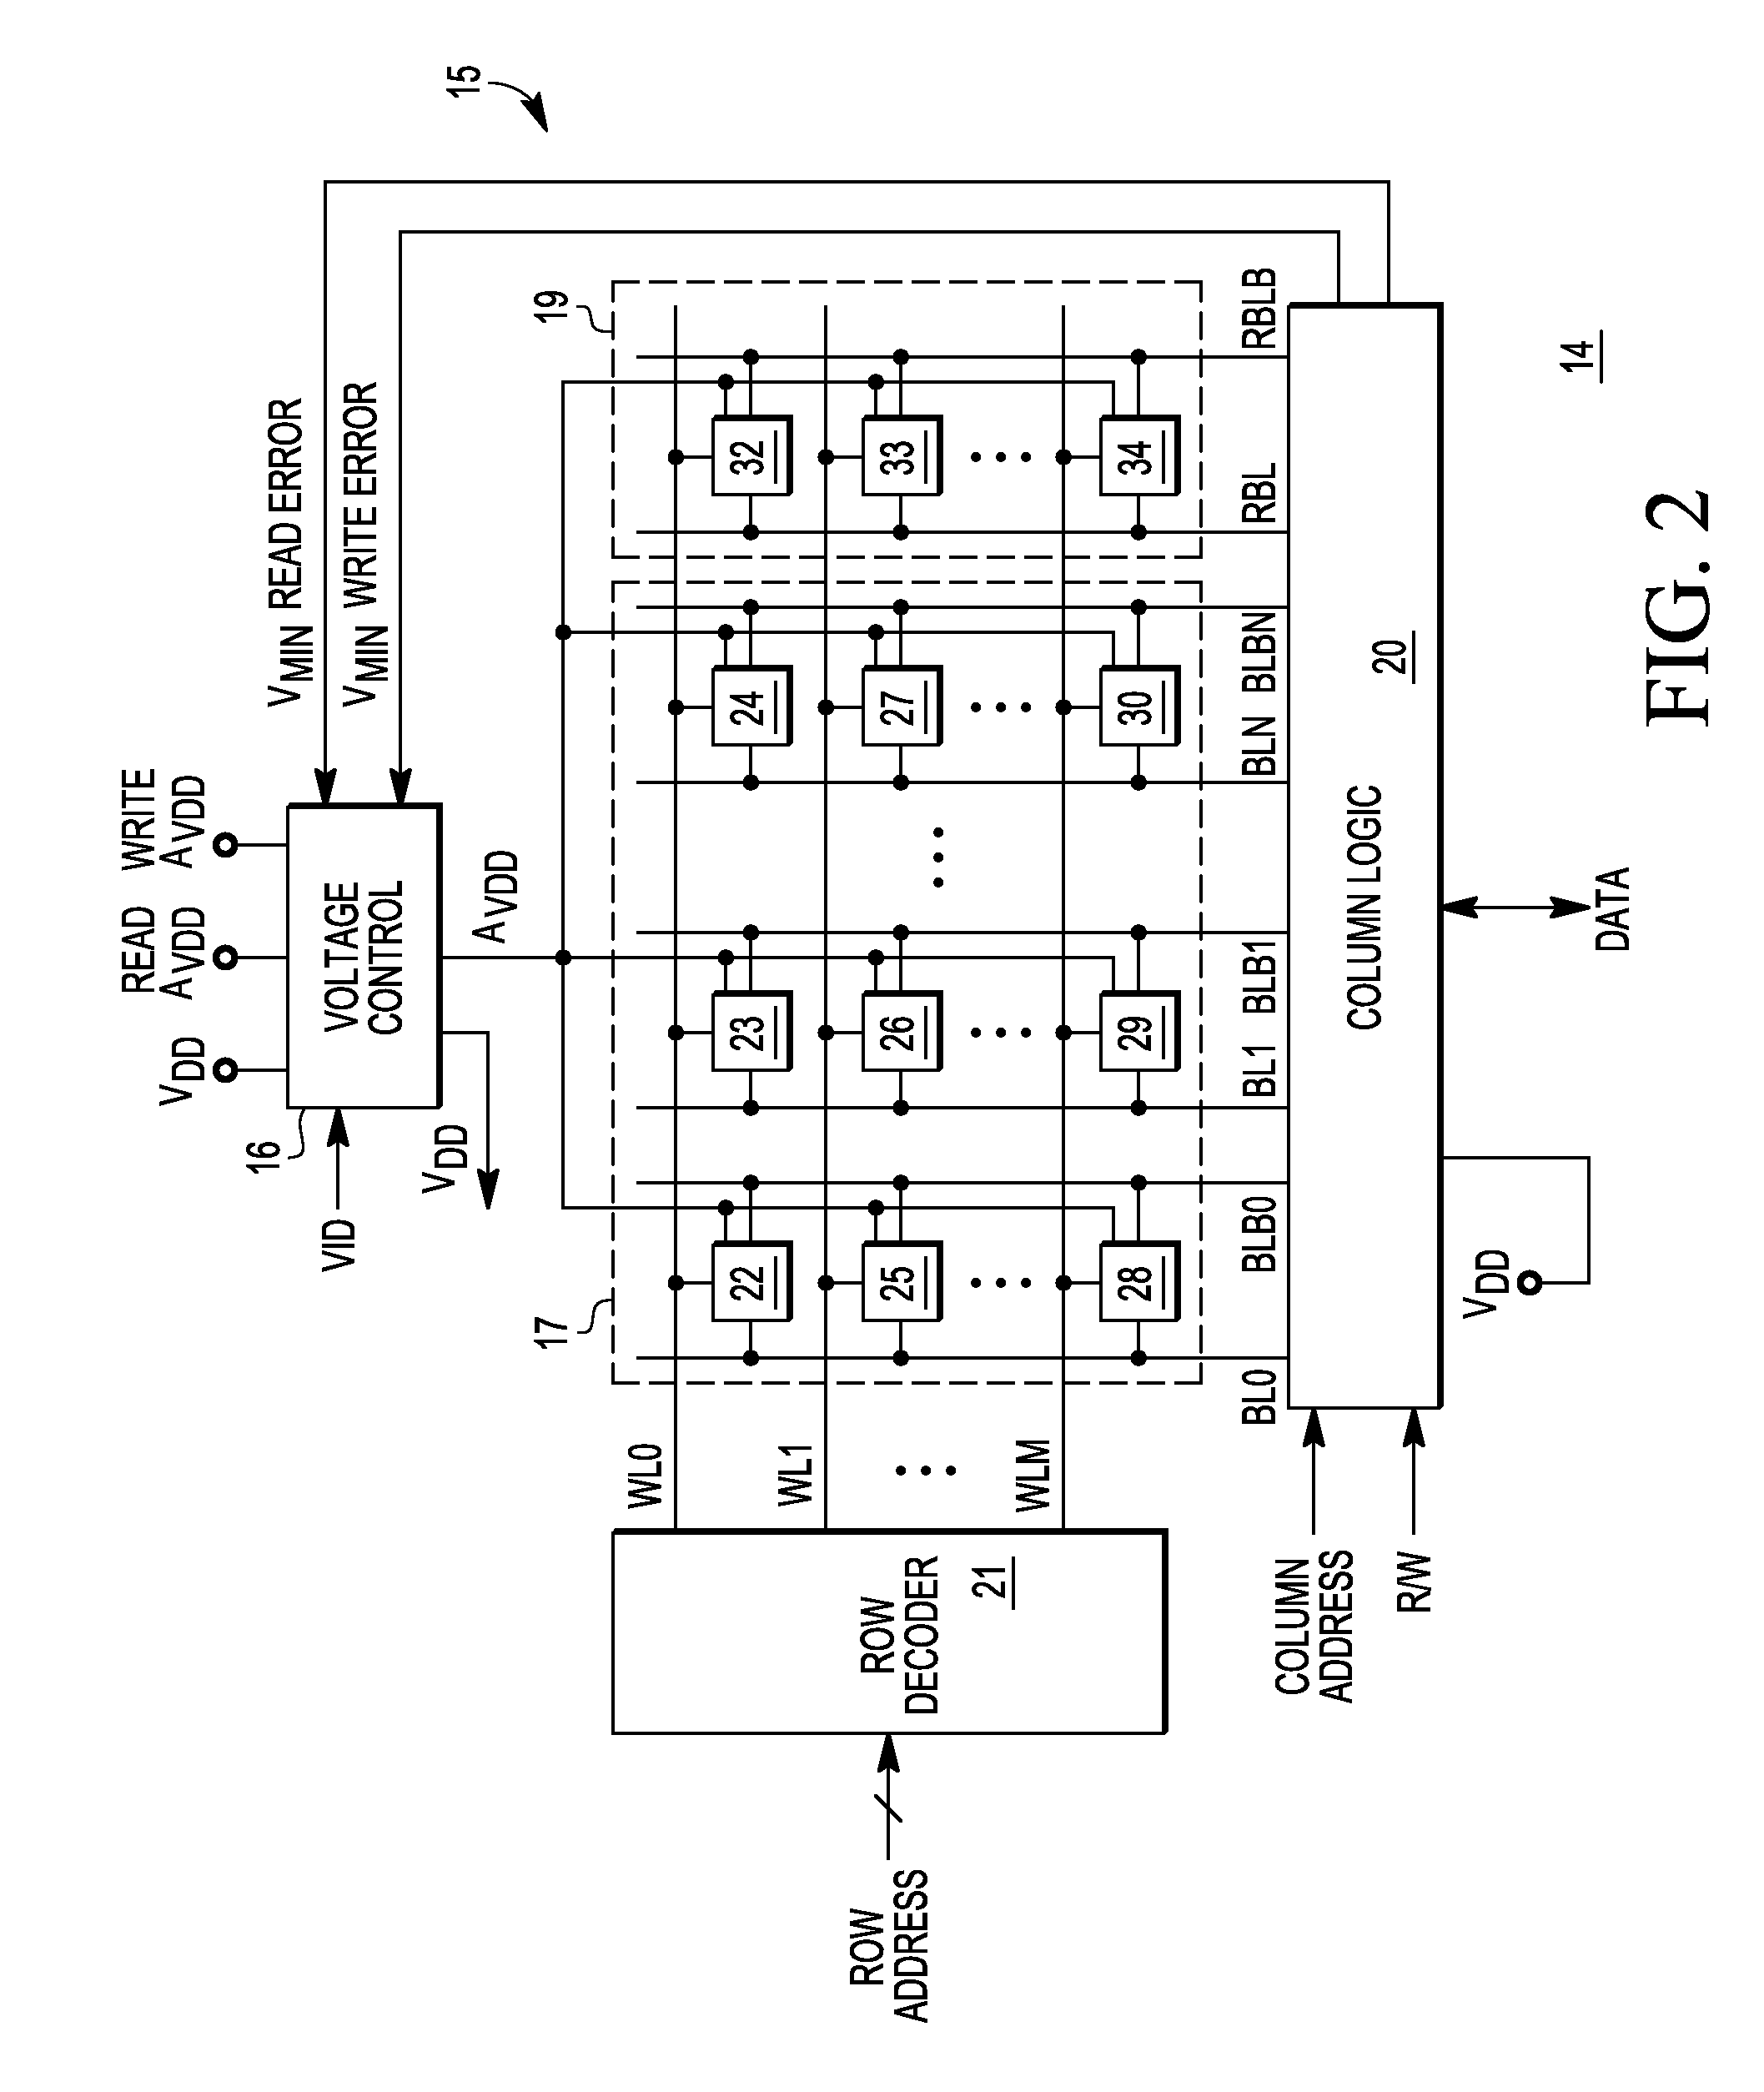 Integrated circuit memory having assisted access and method therefor